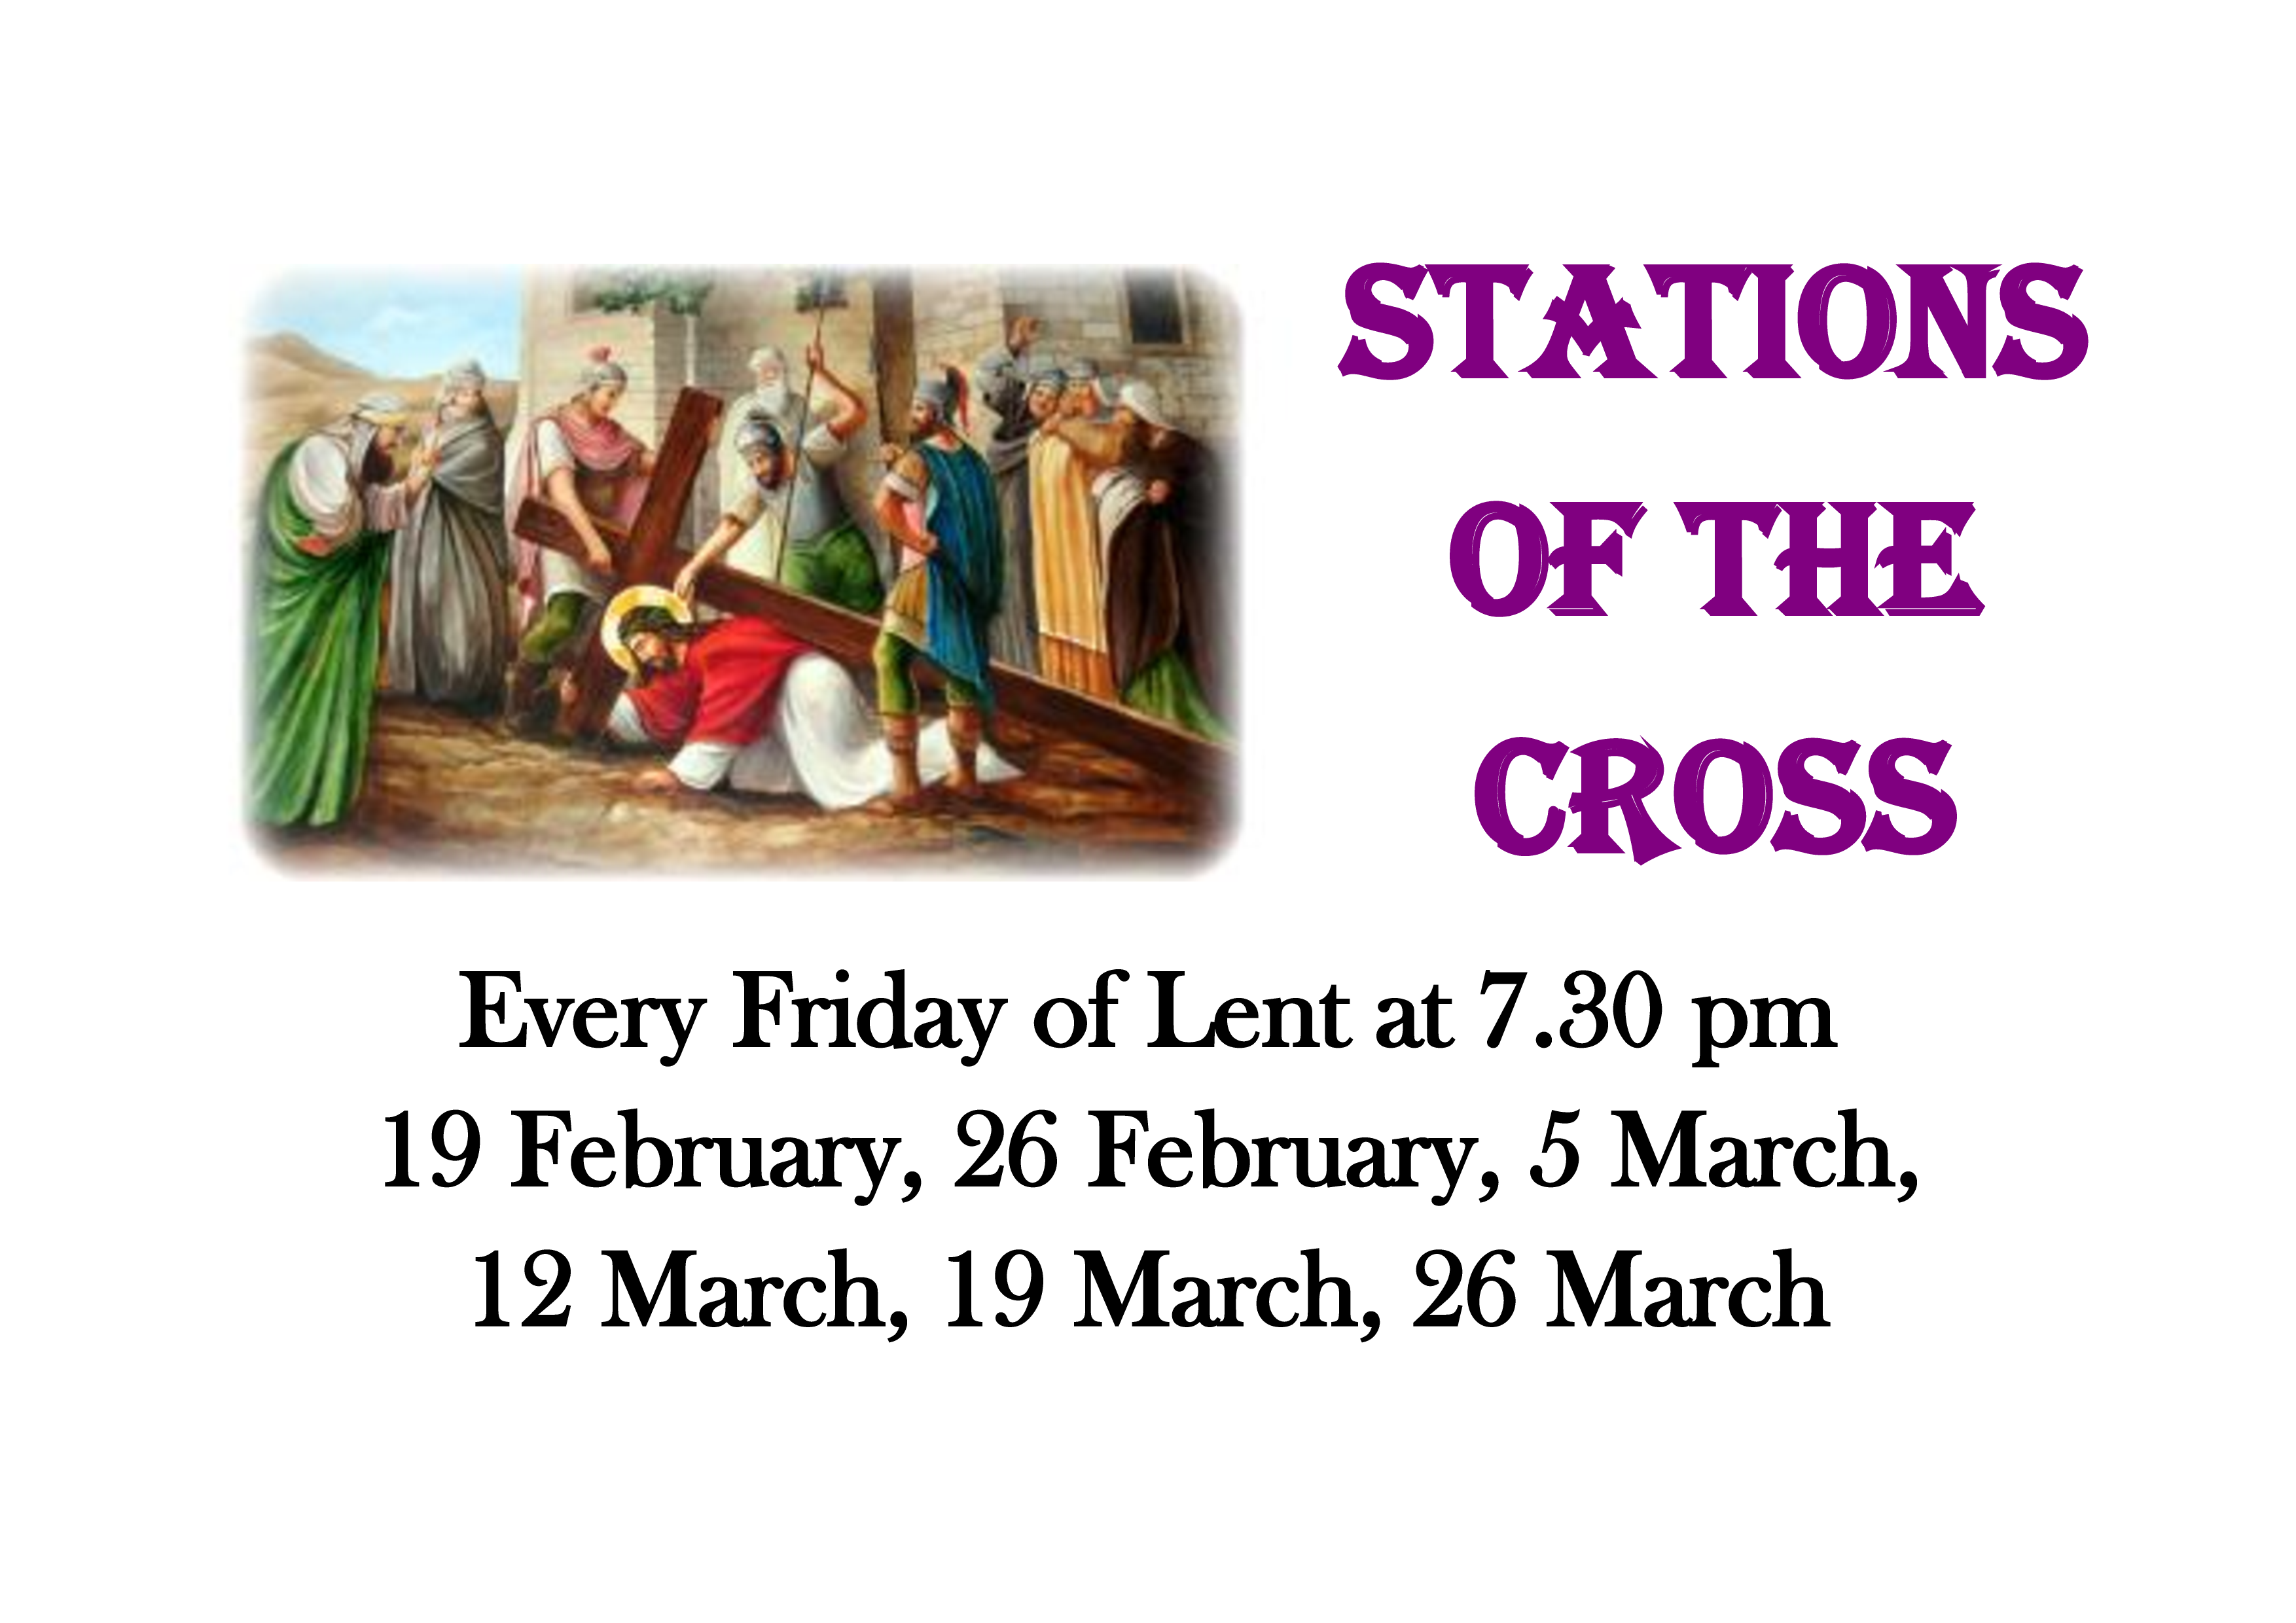 Station of the Cross 2021 poster